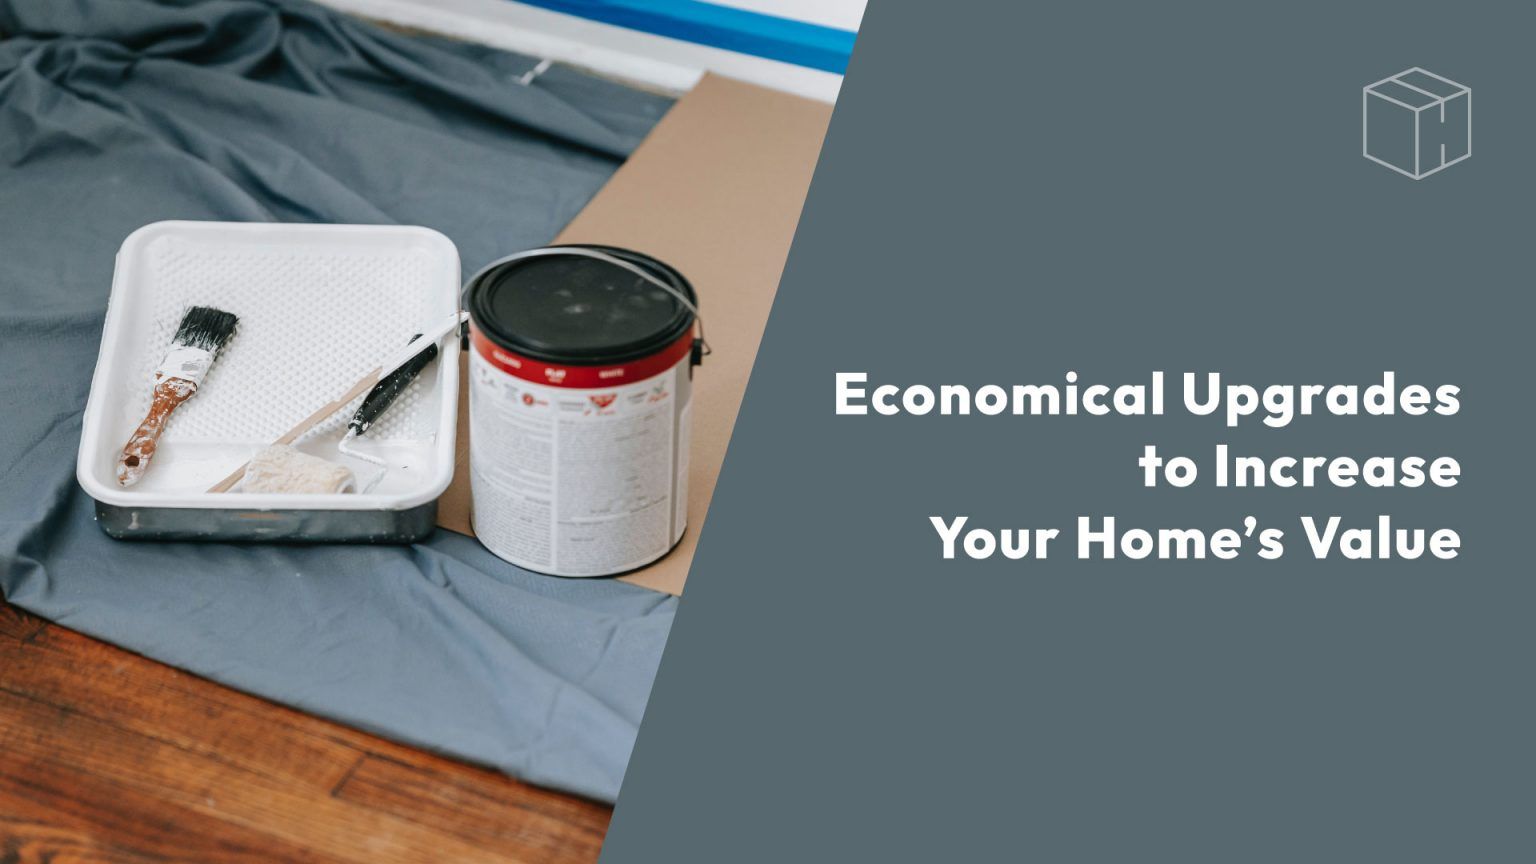 Economical Upgrades to Increase Your Home’s Value